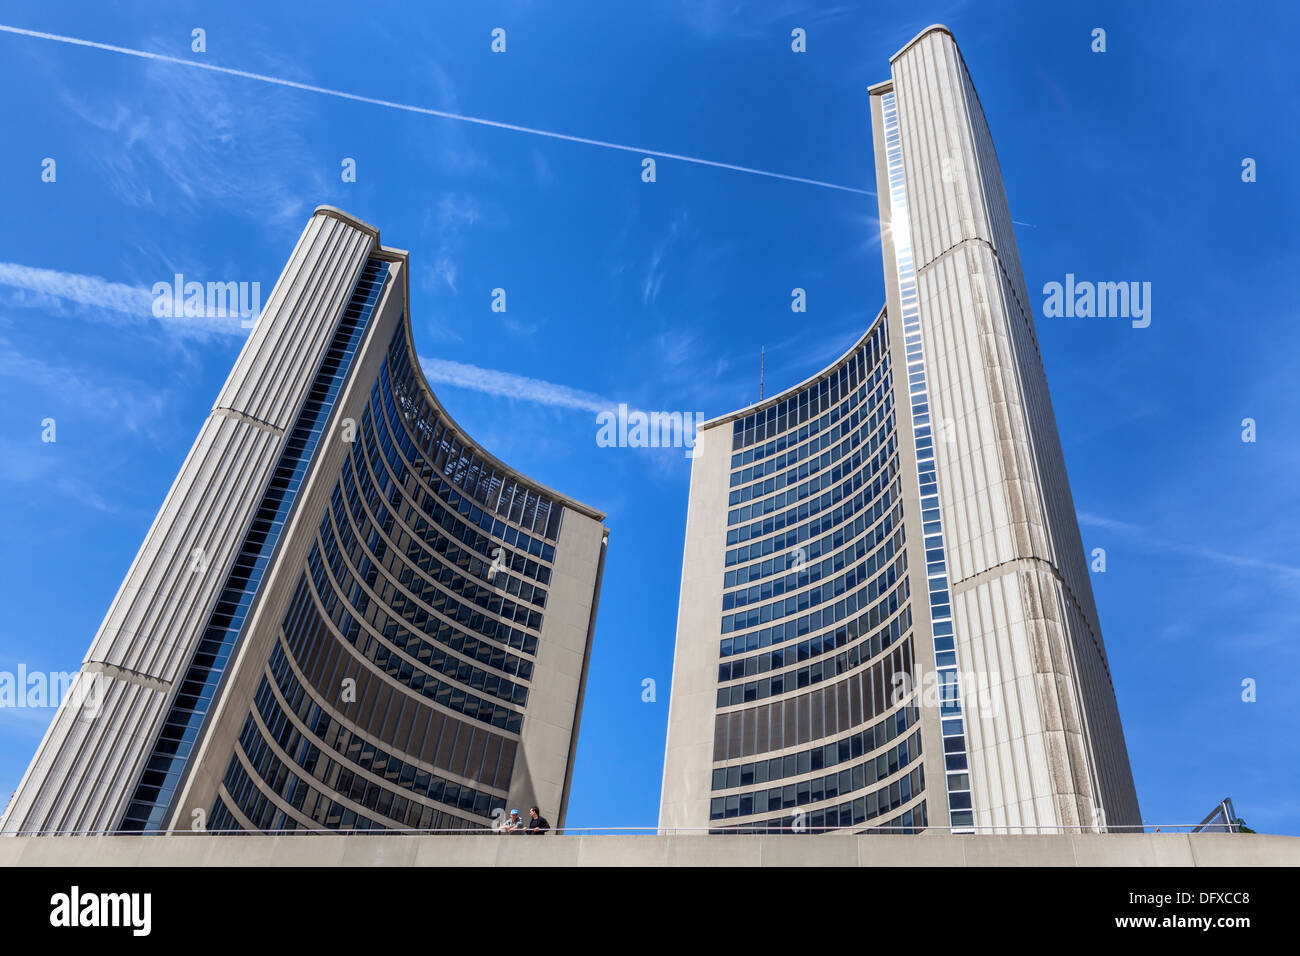 Modern curved stone buildings of the new City Hall against a blue sky in Nathan Phillips Square, 100 Queen ST, West, Toronto Stock Photo